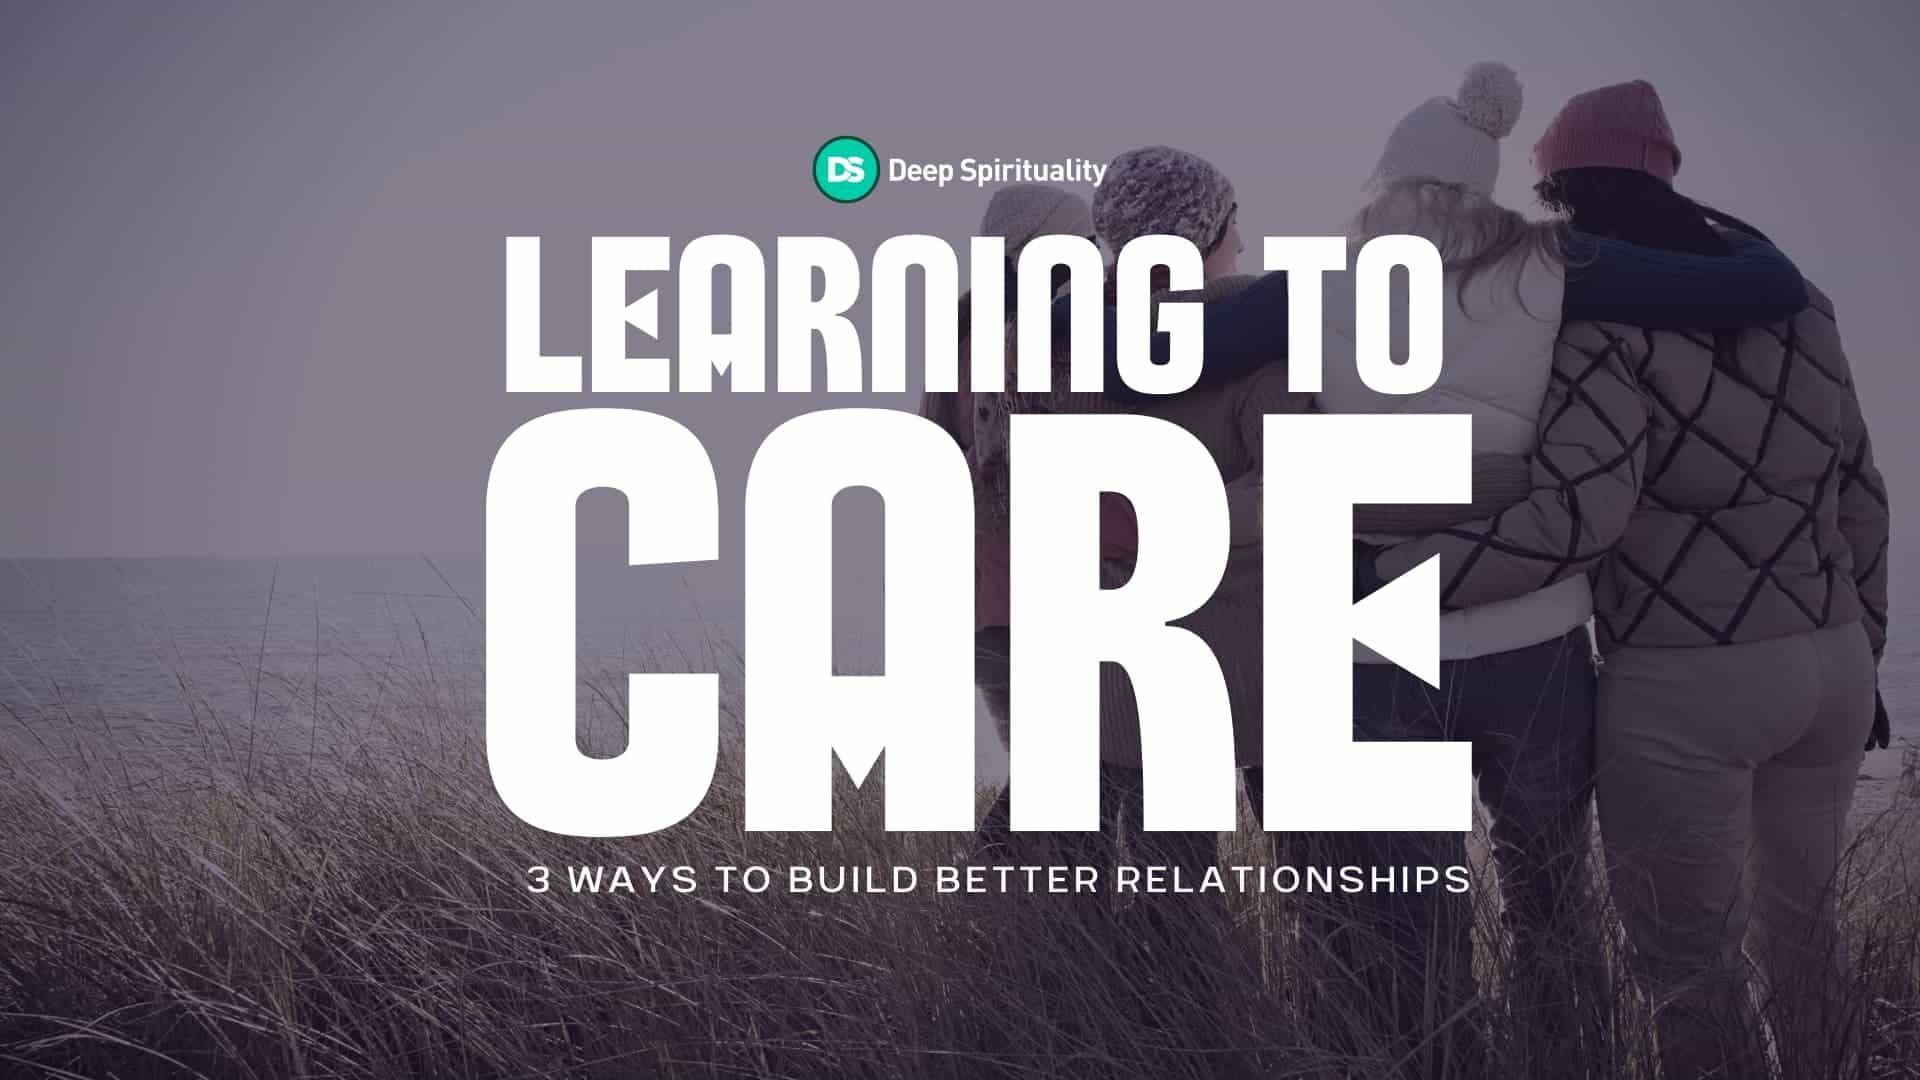 Learning to Care: 3 Ways to Build Better, More Compassionate Relationships 2